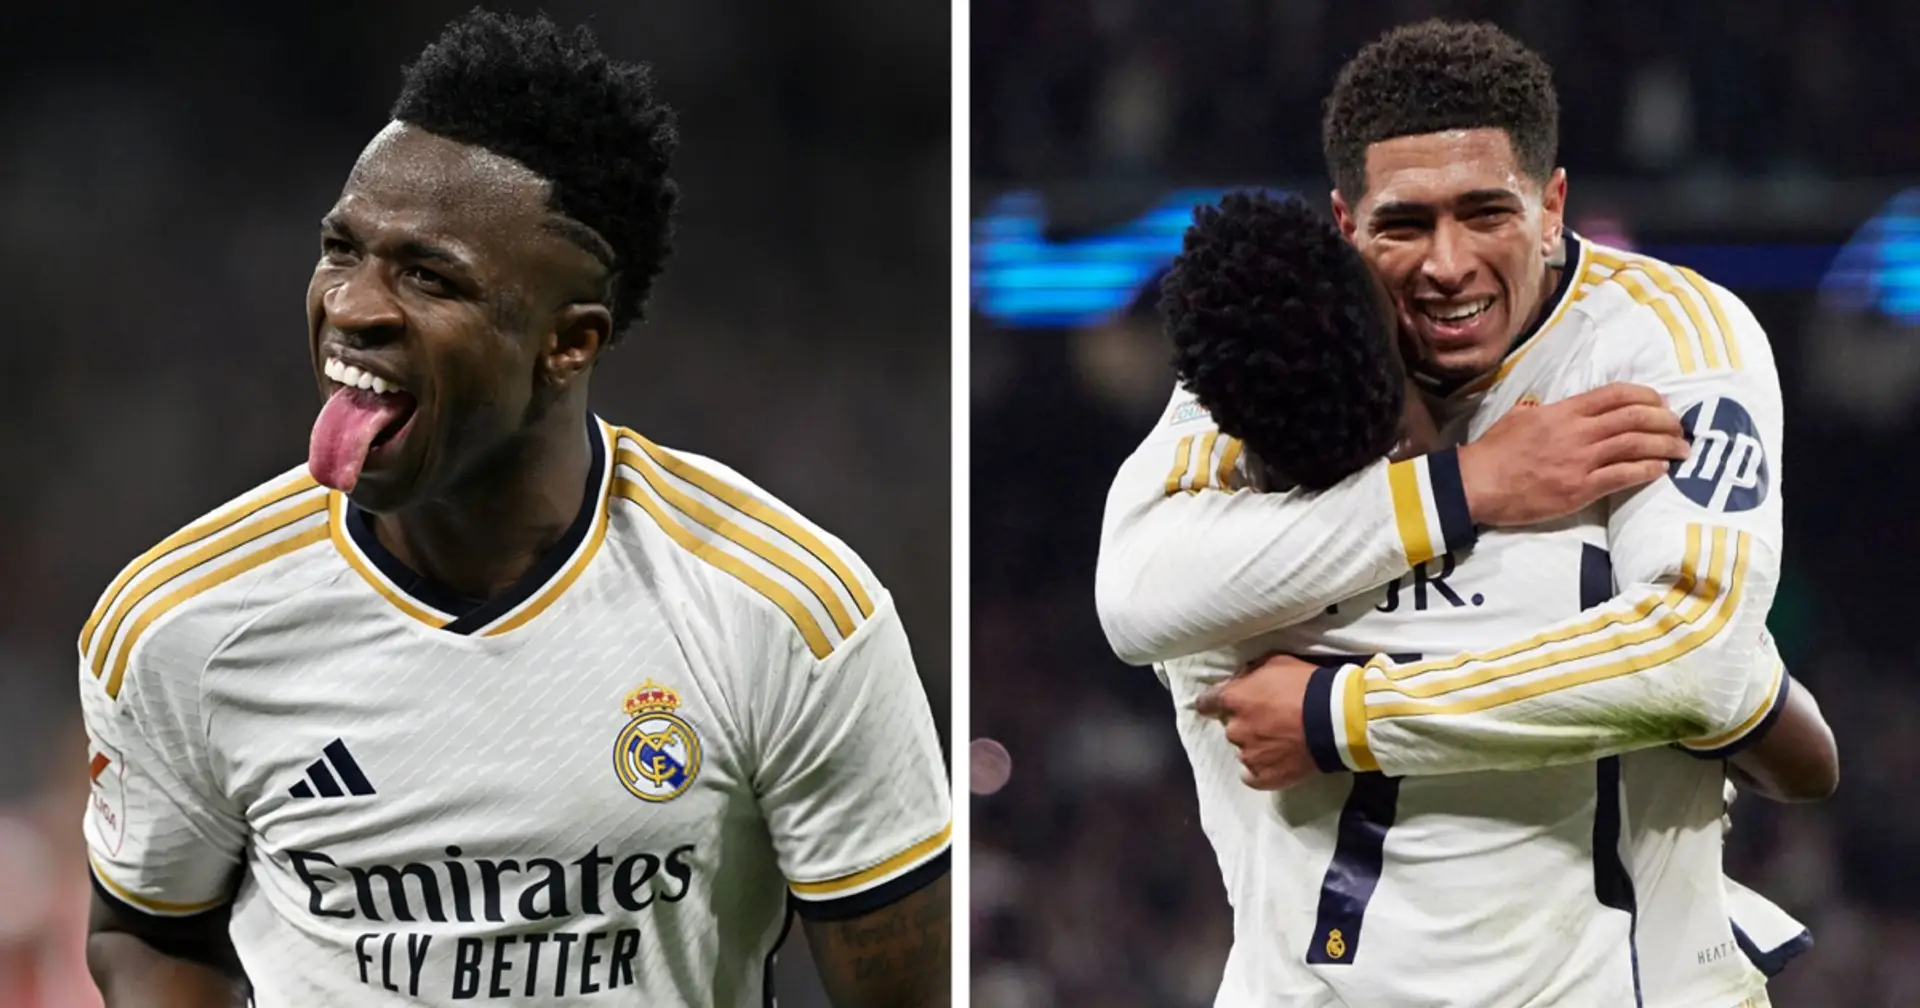 'Mr. Champions League' - Vinicius Jr.'s insane stats in the competition ahead of the Man City clash